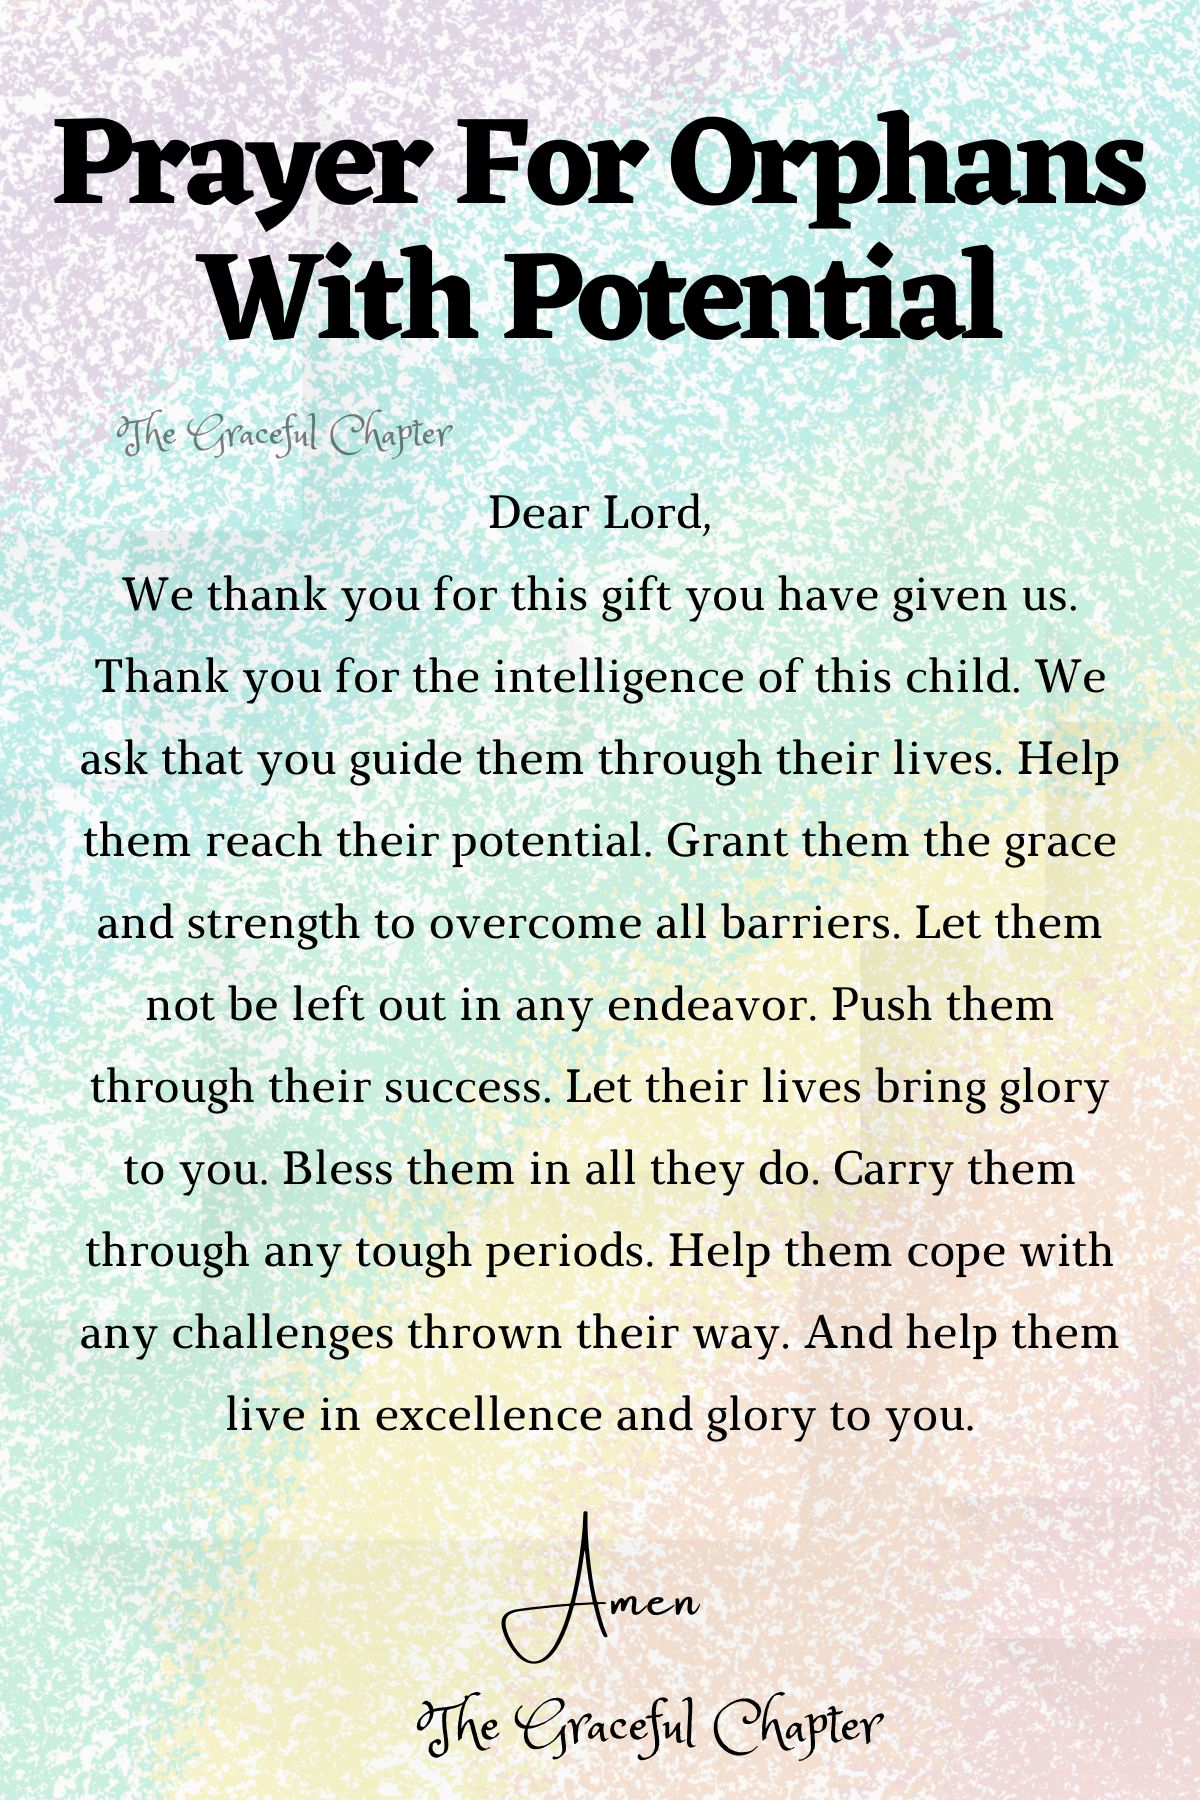 Prayer for orphans with potential